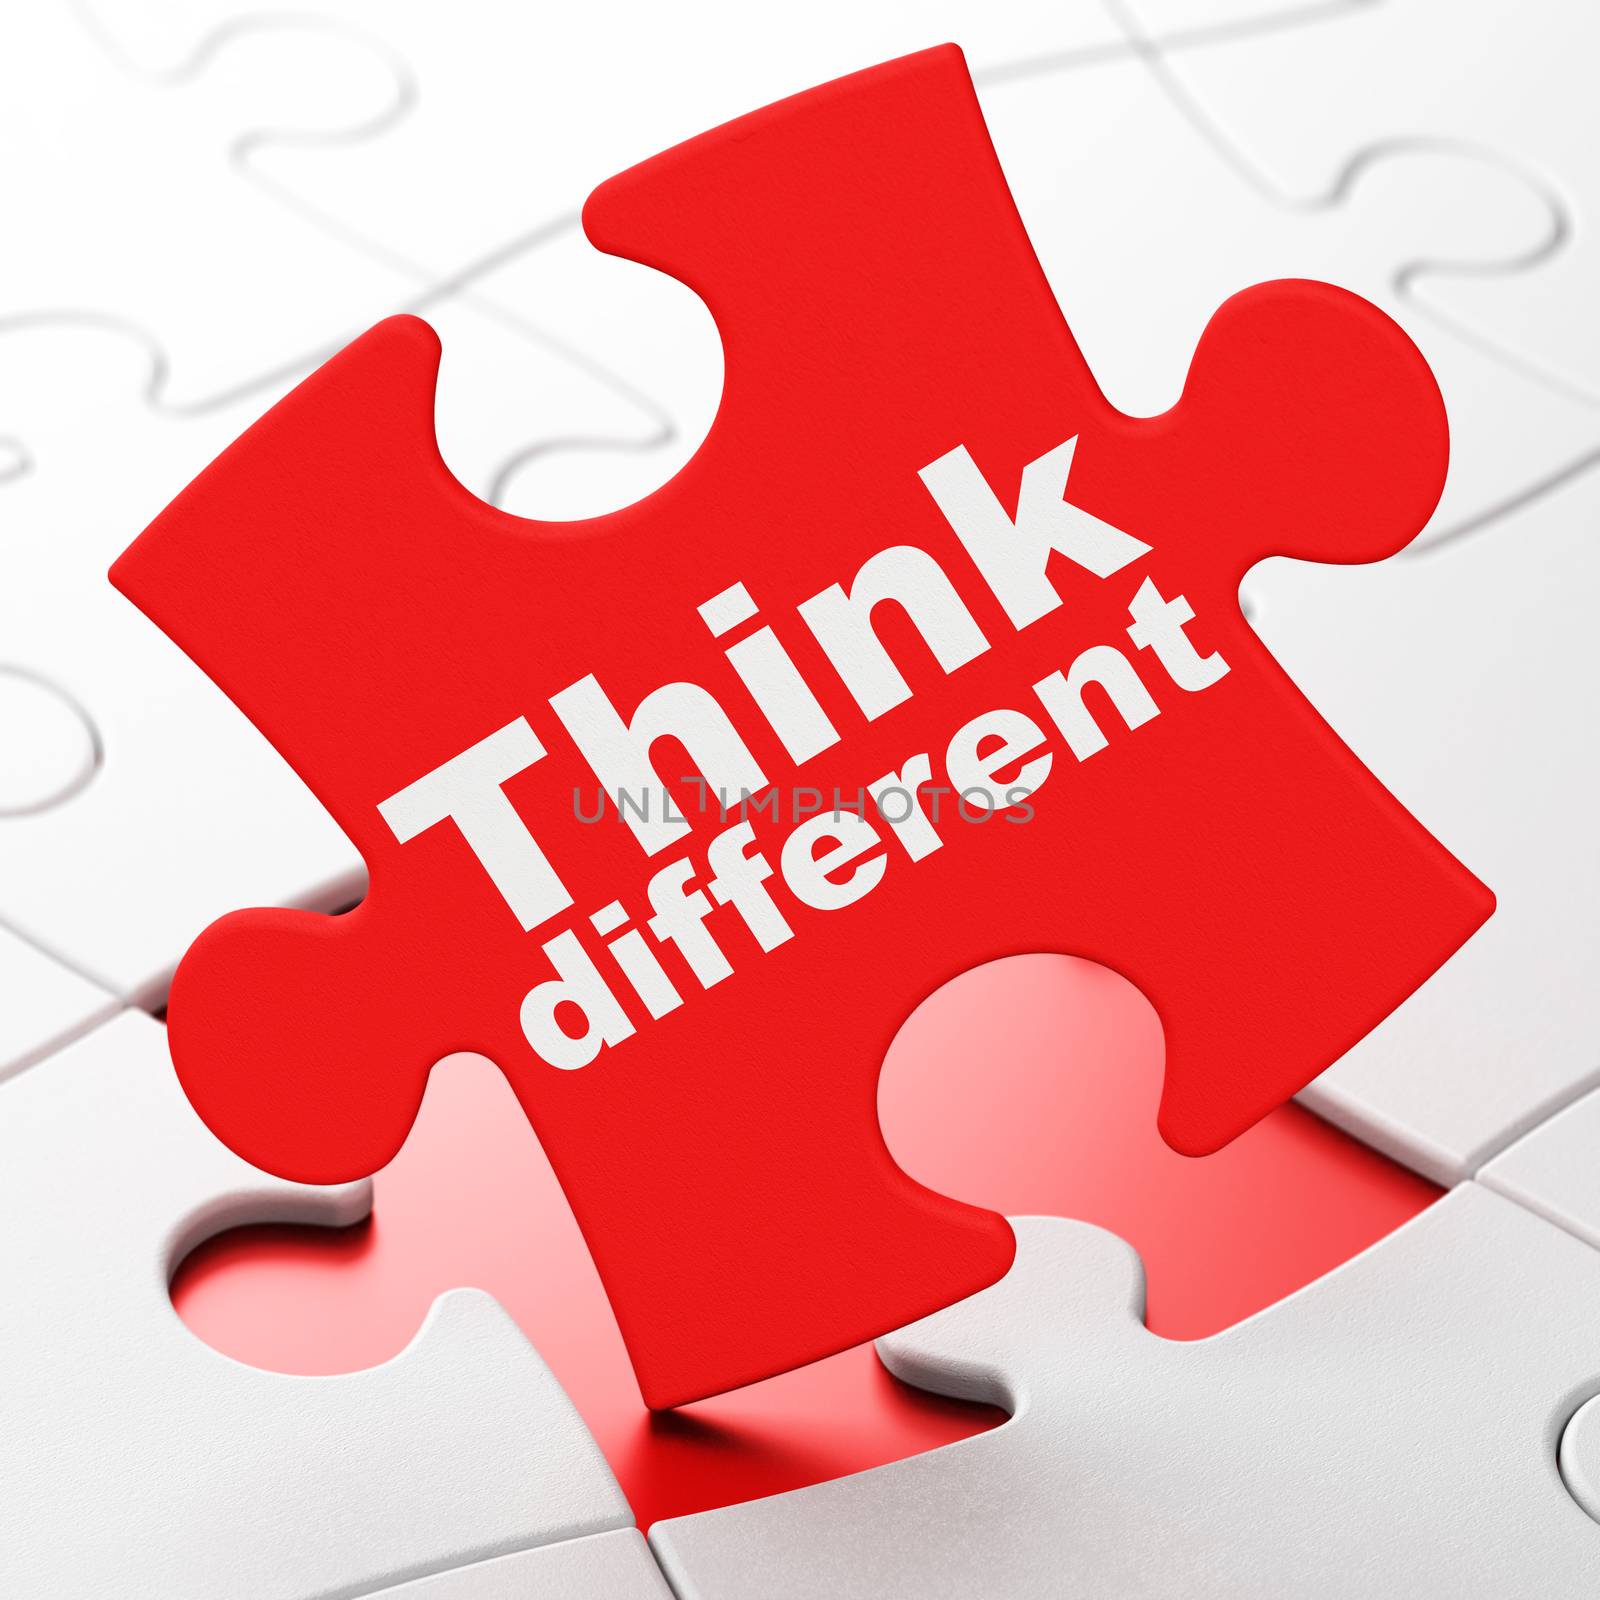 Studying concept: Think Different on Red puzzle pieces background, 3D rendering